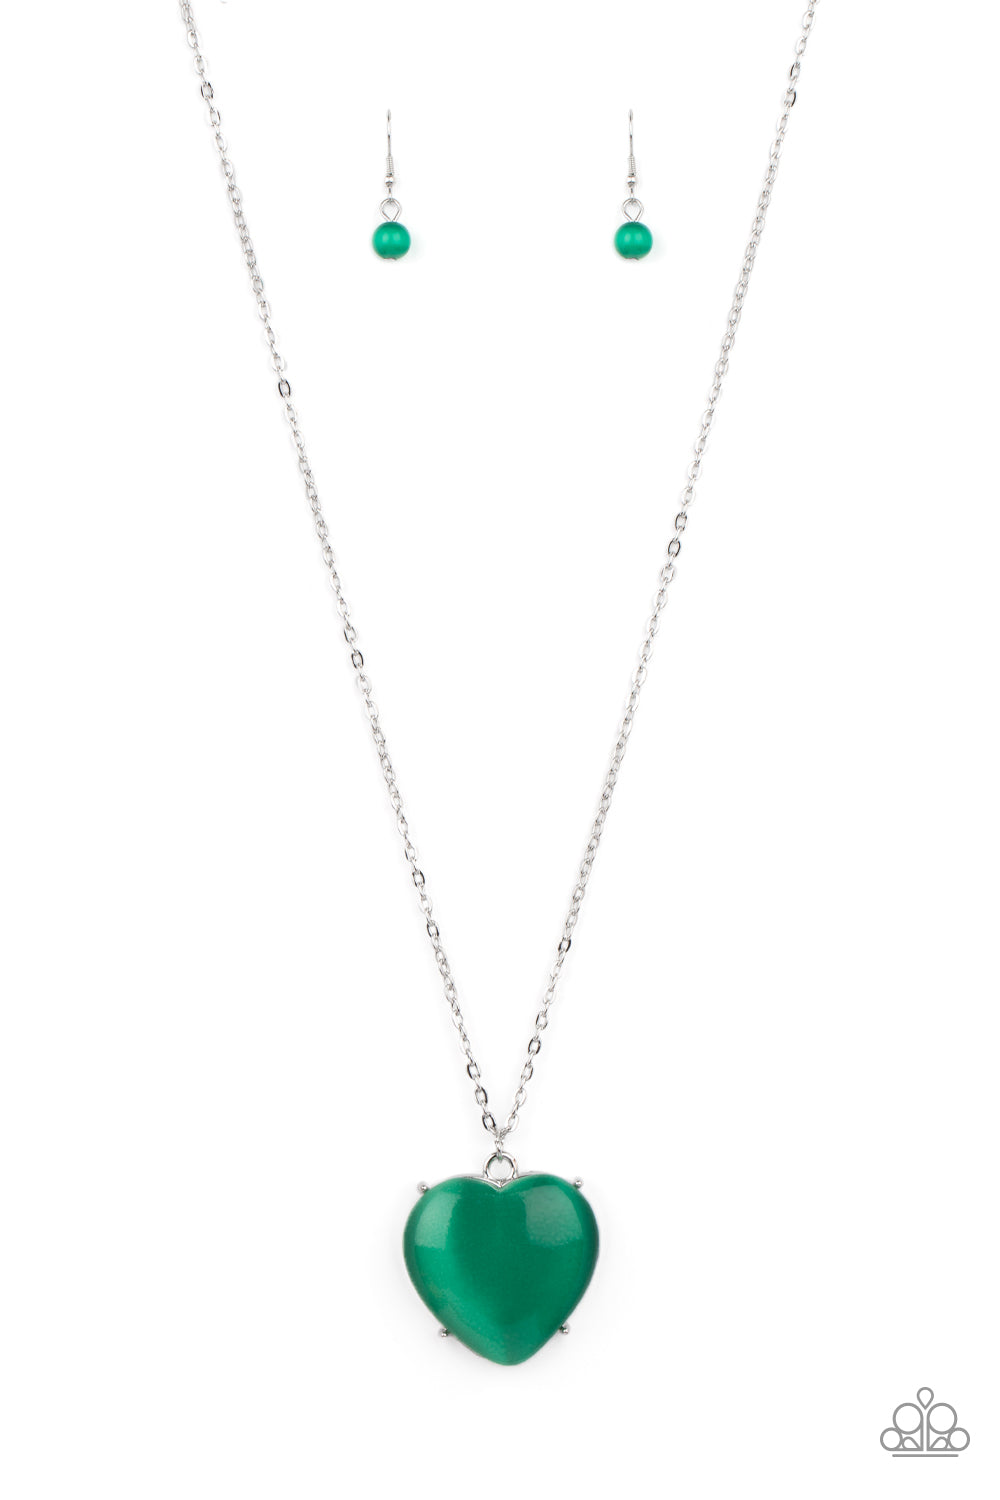 Warmhearted Glow Green Heart Necklace - Paparazzi Accessories  An oversized Mint cat's eye stone frame swings from the bottom of a lengthened silver chain, creating a flirtatious pendant. Features an adjustable clasp closure.  All Paparazzi Accessories are lead free and nickel free!  Sold as one individual necklace. Includes one pair of matching earrings.